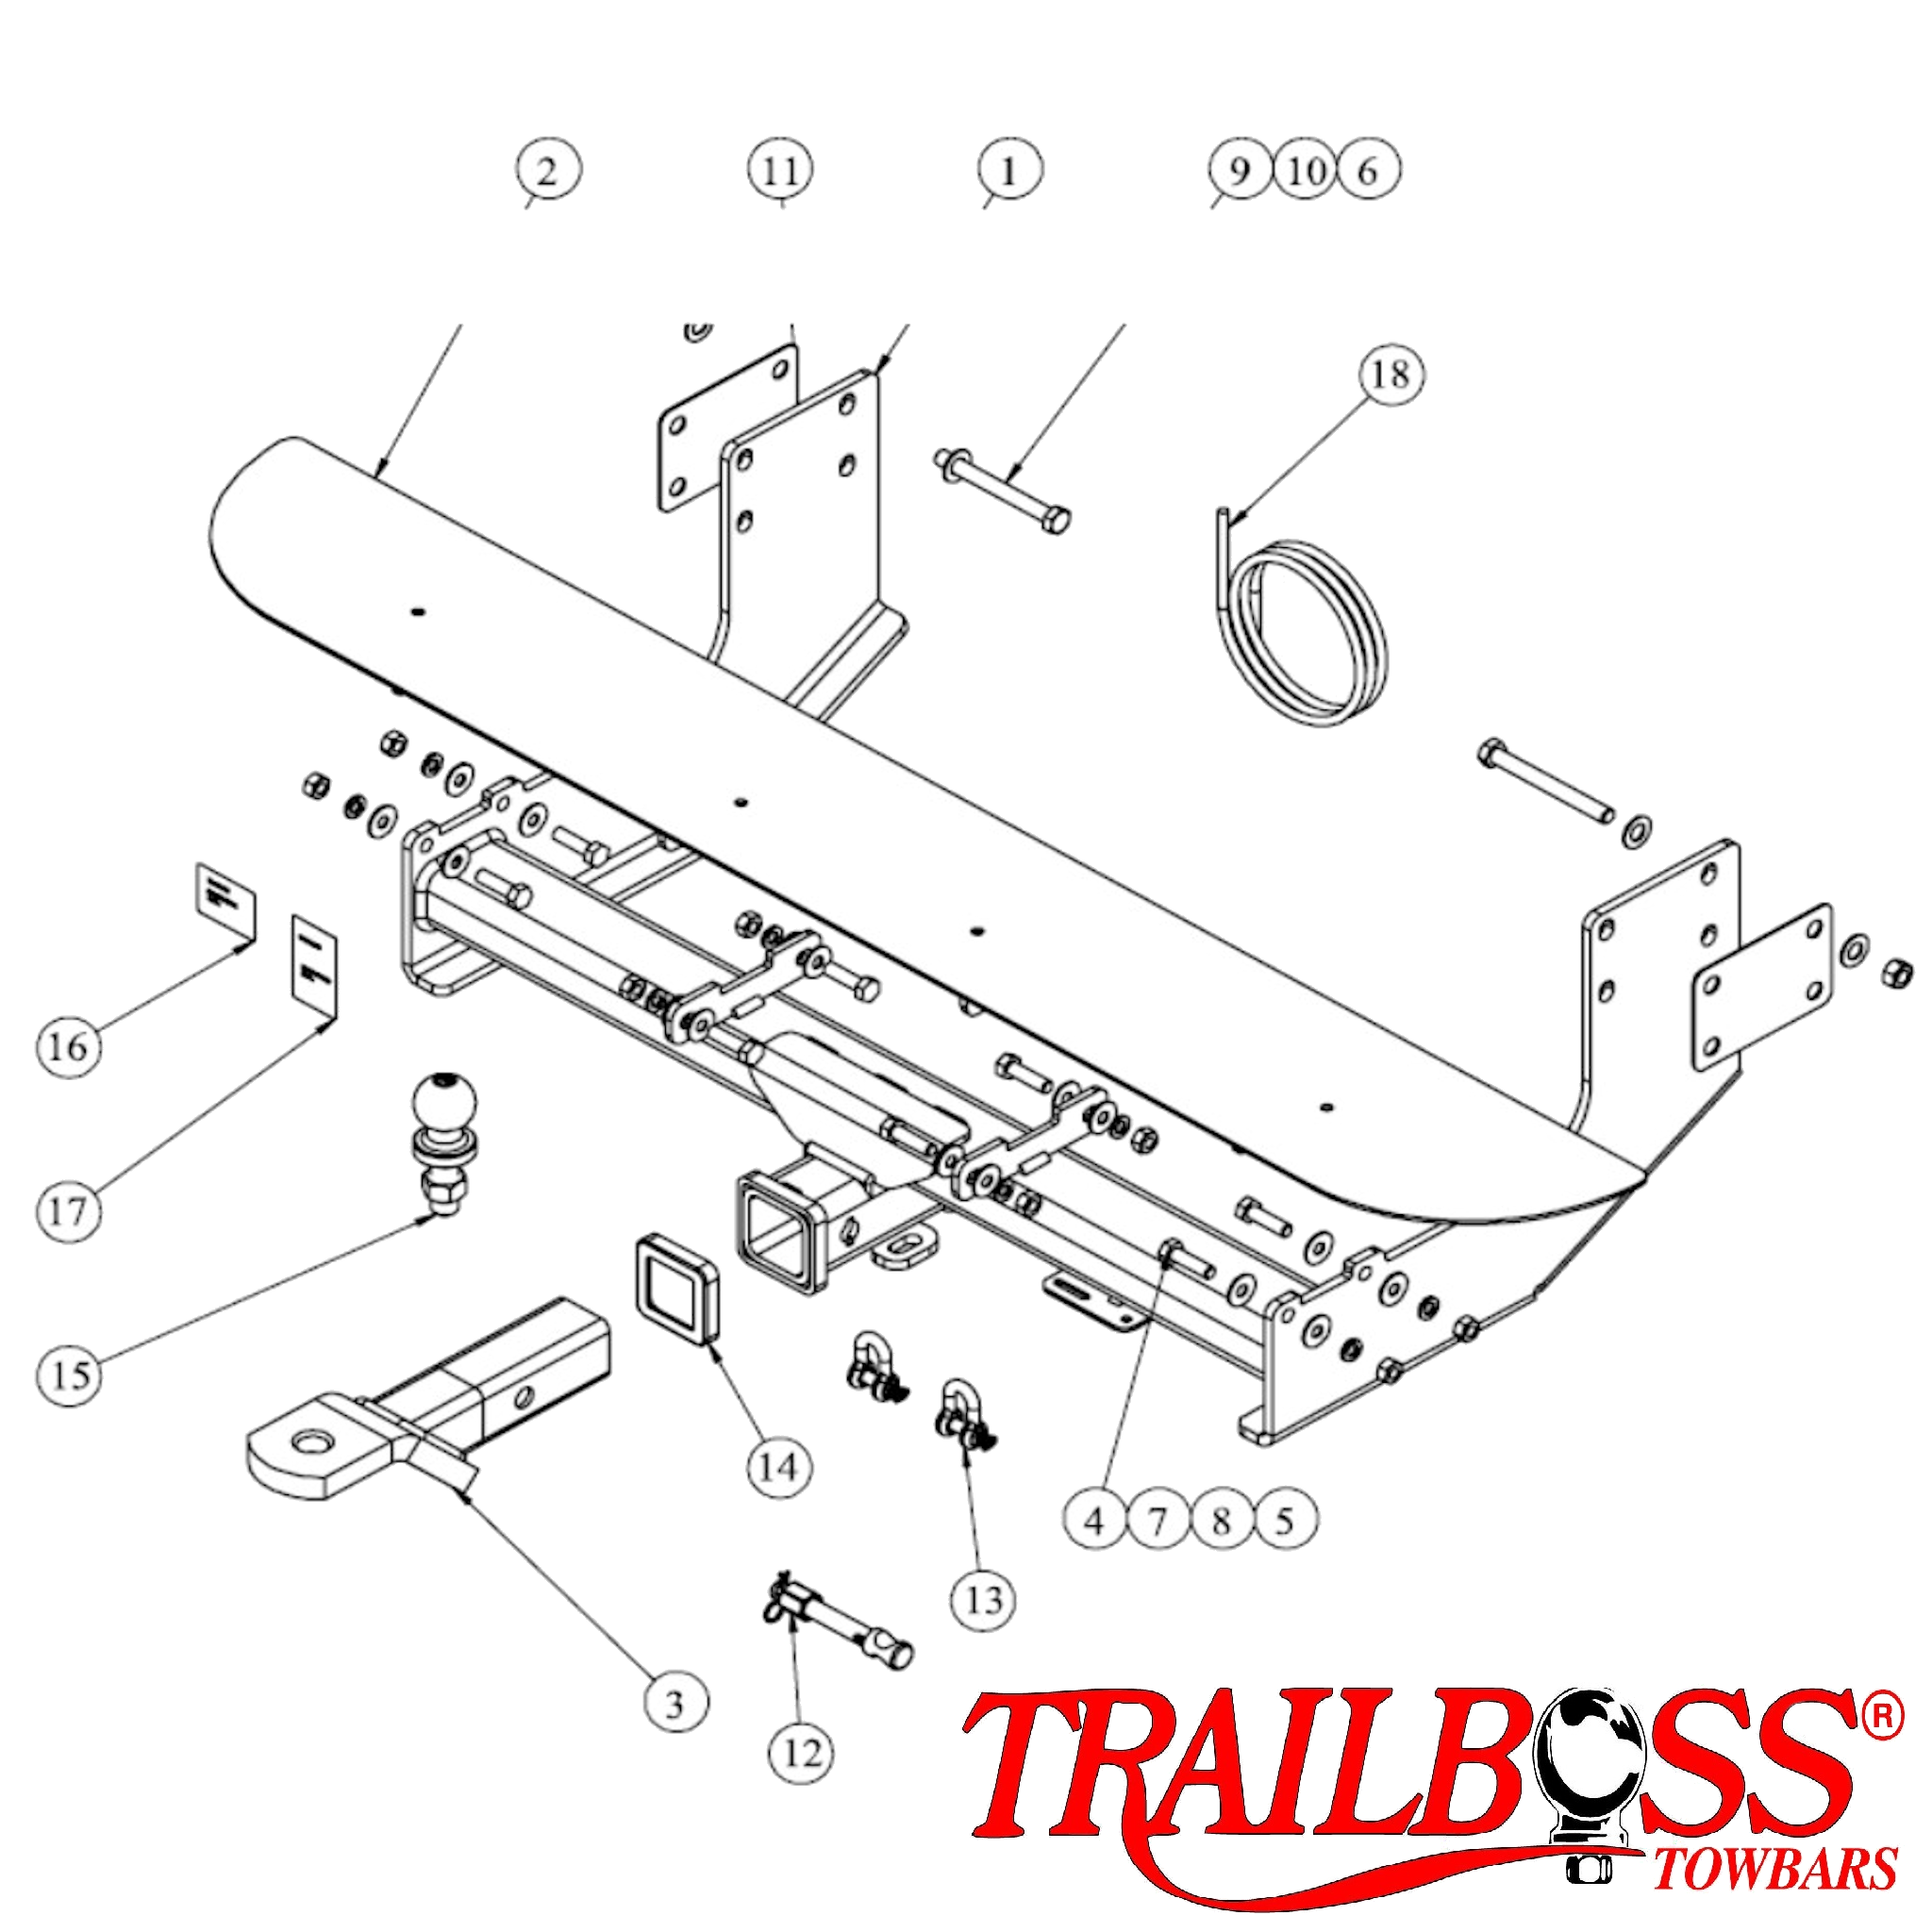 Mercedes-Benz Sprinter SWB Rear Spring Hanger at end of Chassis Van With Bumper 11/2006 - 05/2018 - Towbar Kit - HEAVY DUTY PREMIUM